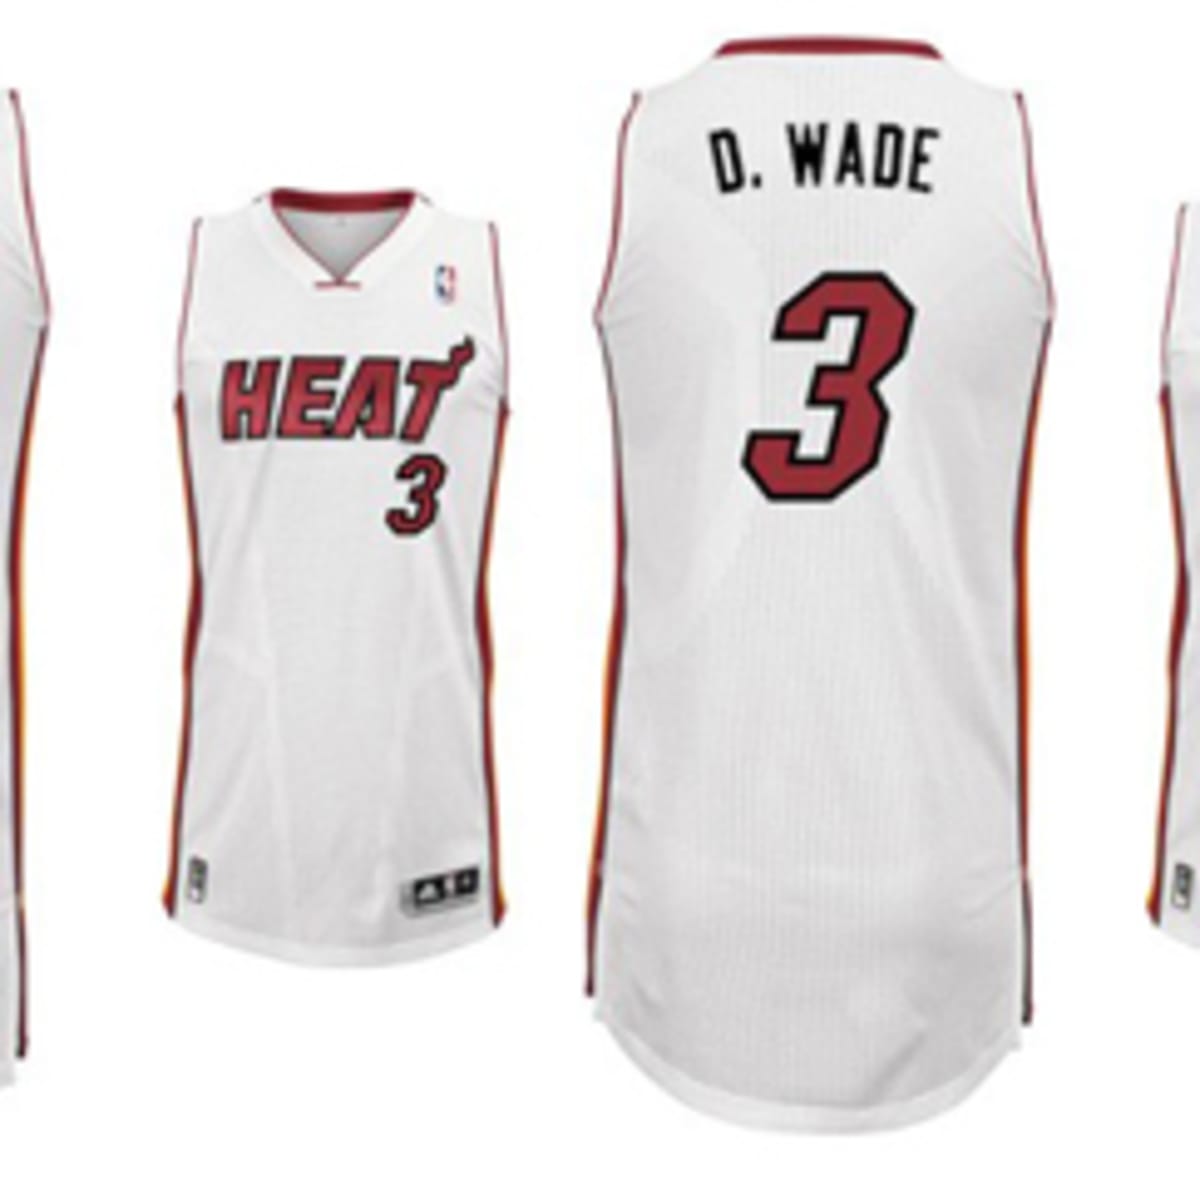 Descanso Deambular Armario Heat unveil 'nickname jerseys' for LeBron James, Dwyane Wade, Ray Allen,  rest of roster - Sports Illustrated